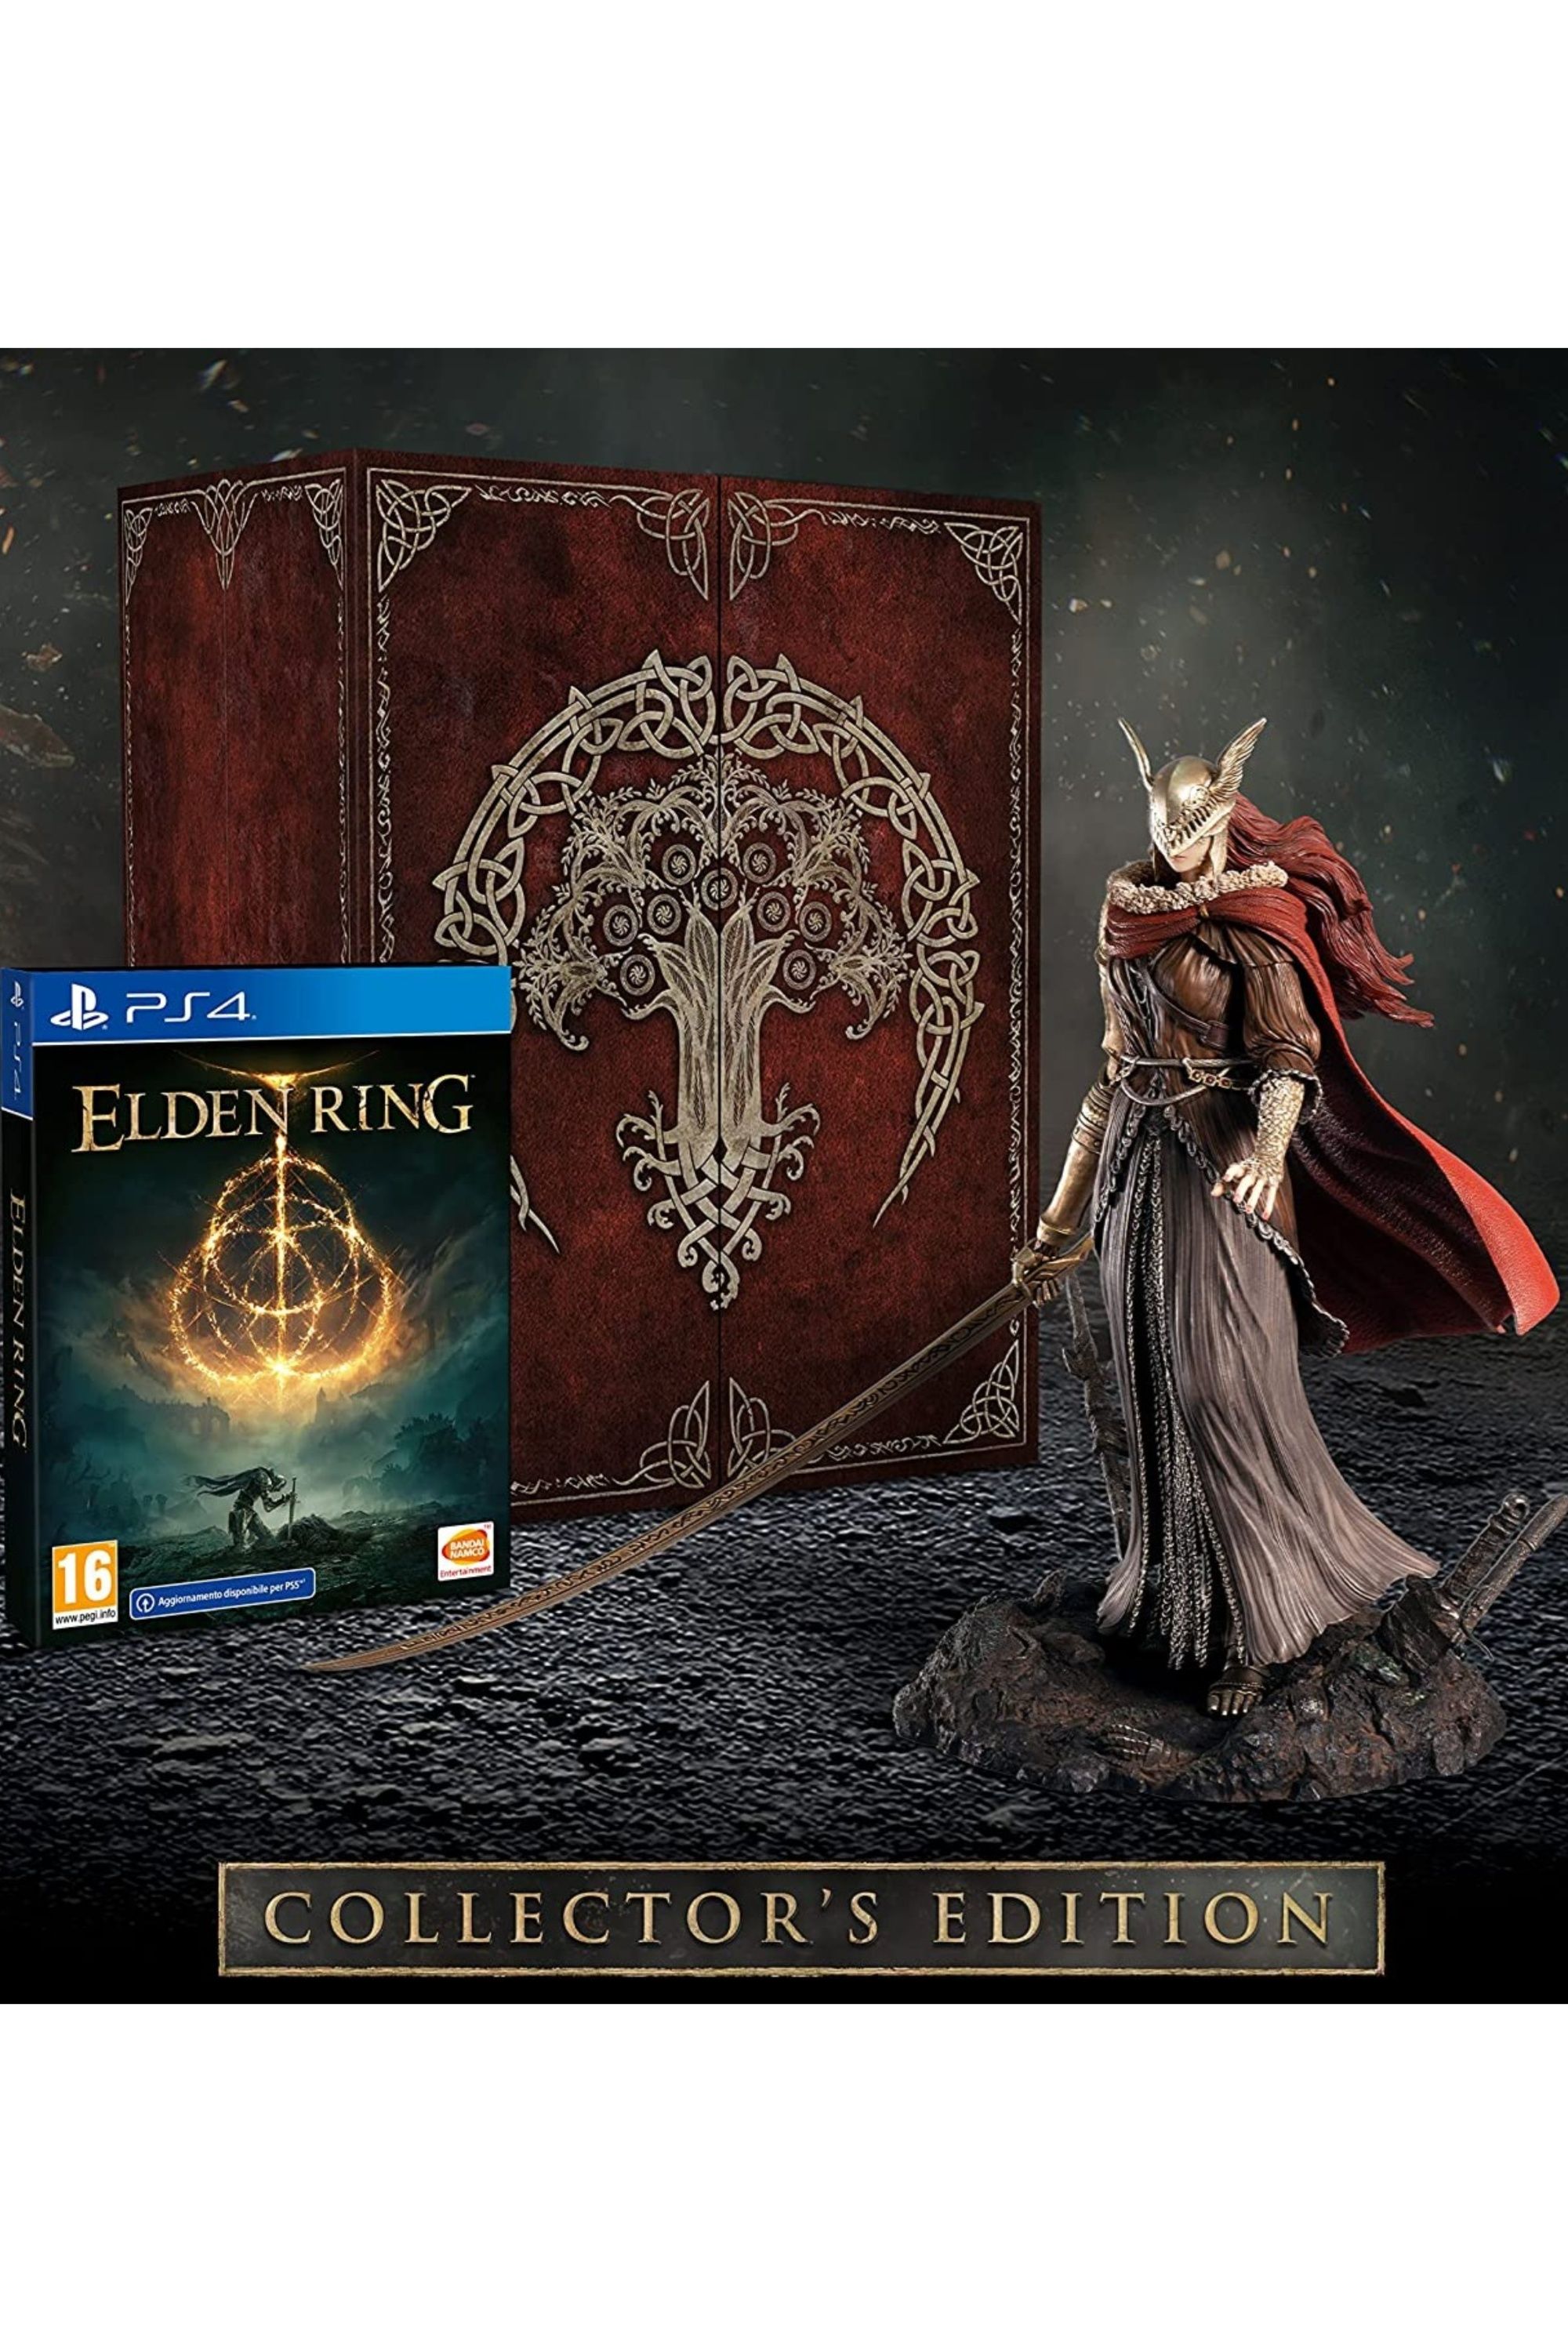 Elden Ring Is Getting A Collector's Edition And A Premium Collector's  Edition